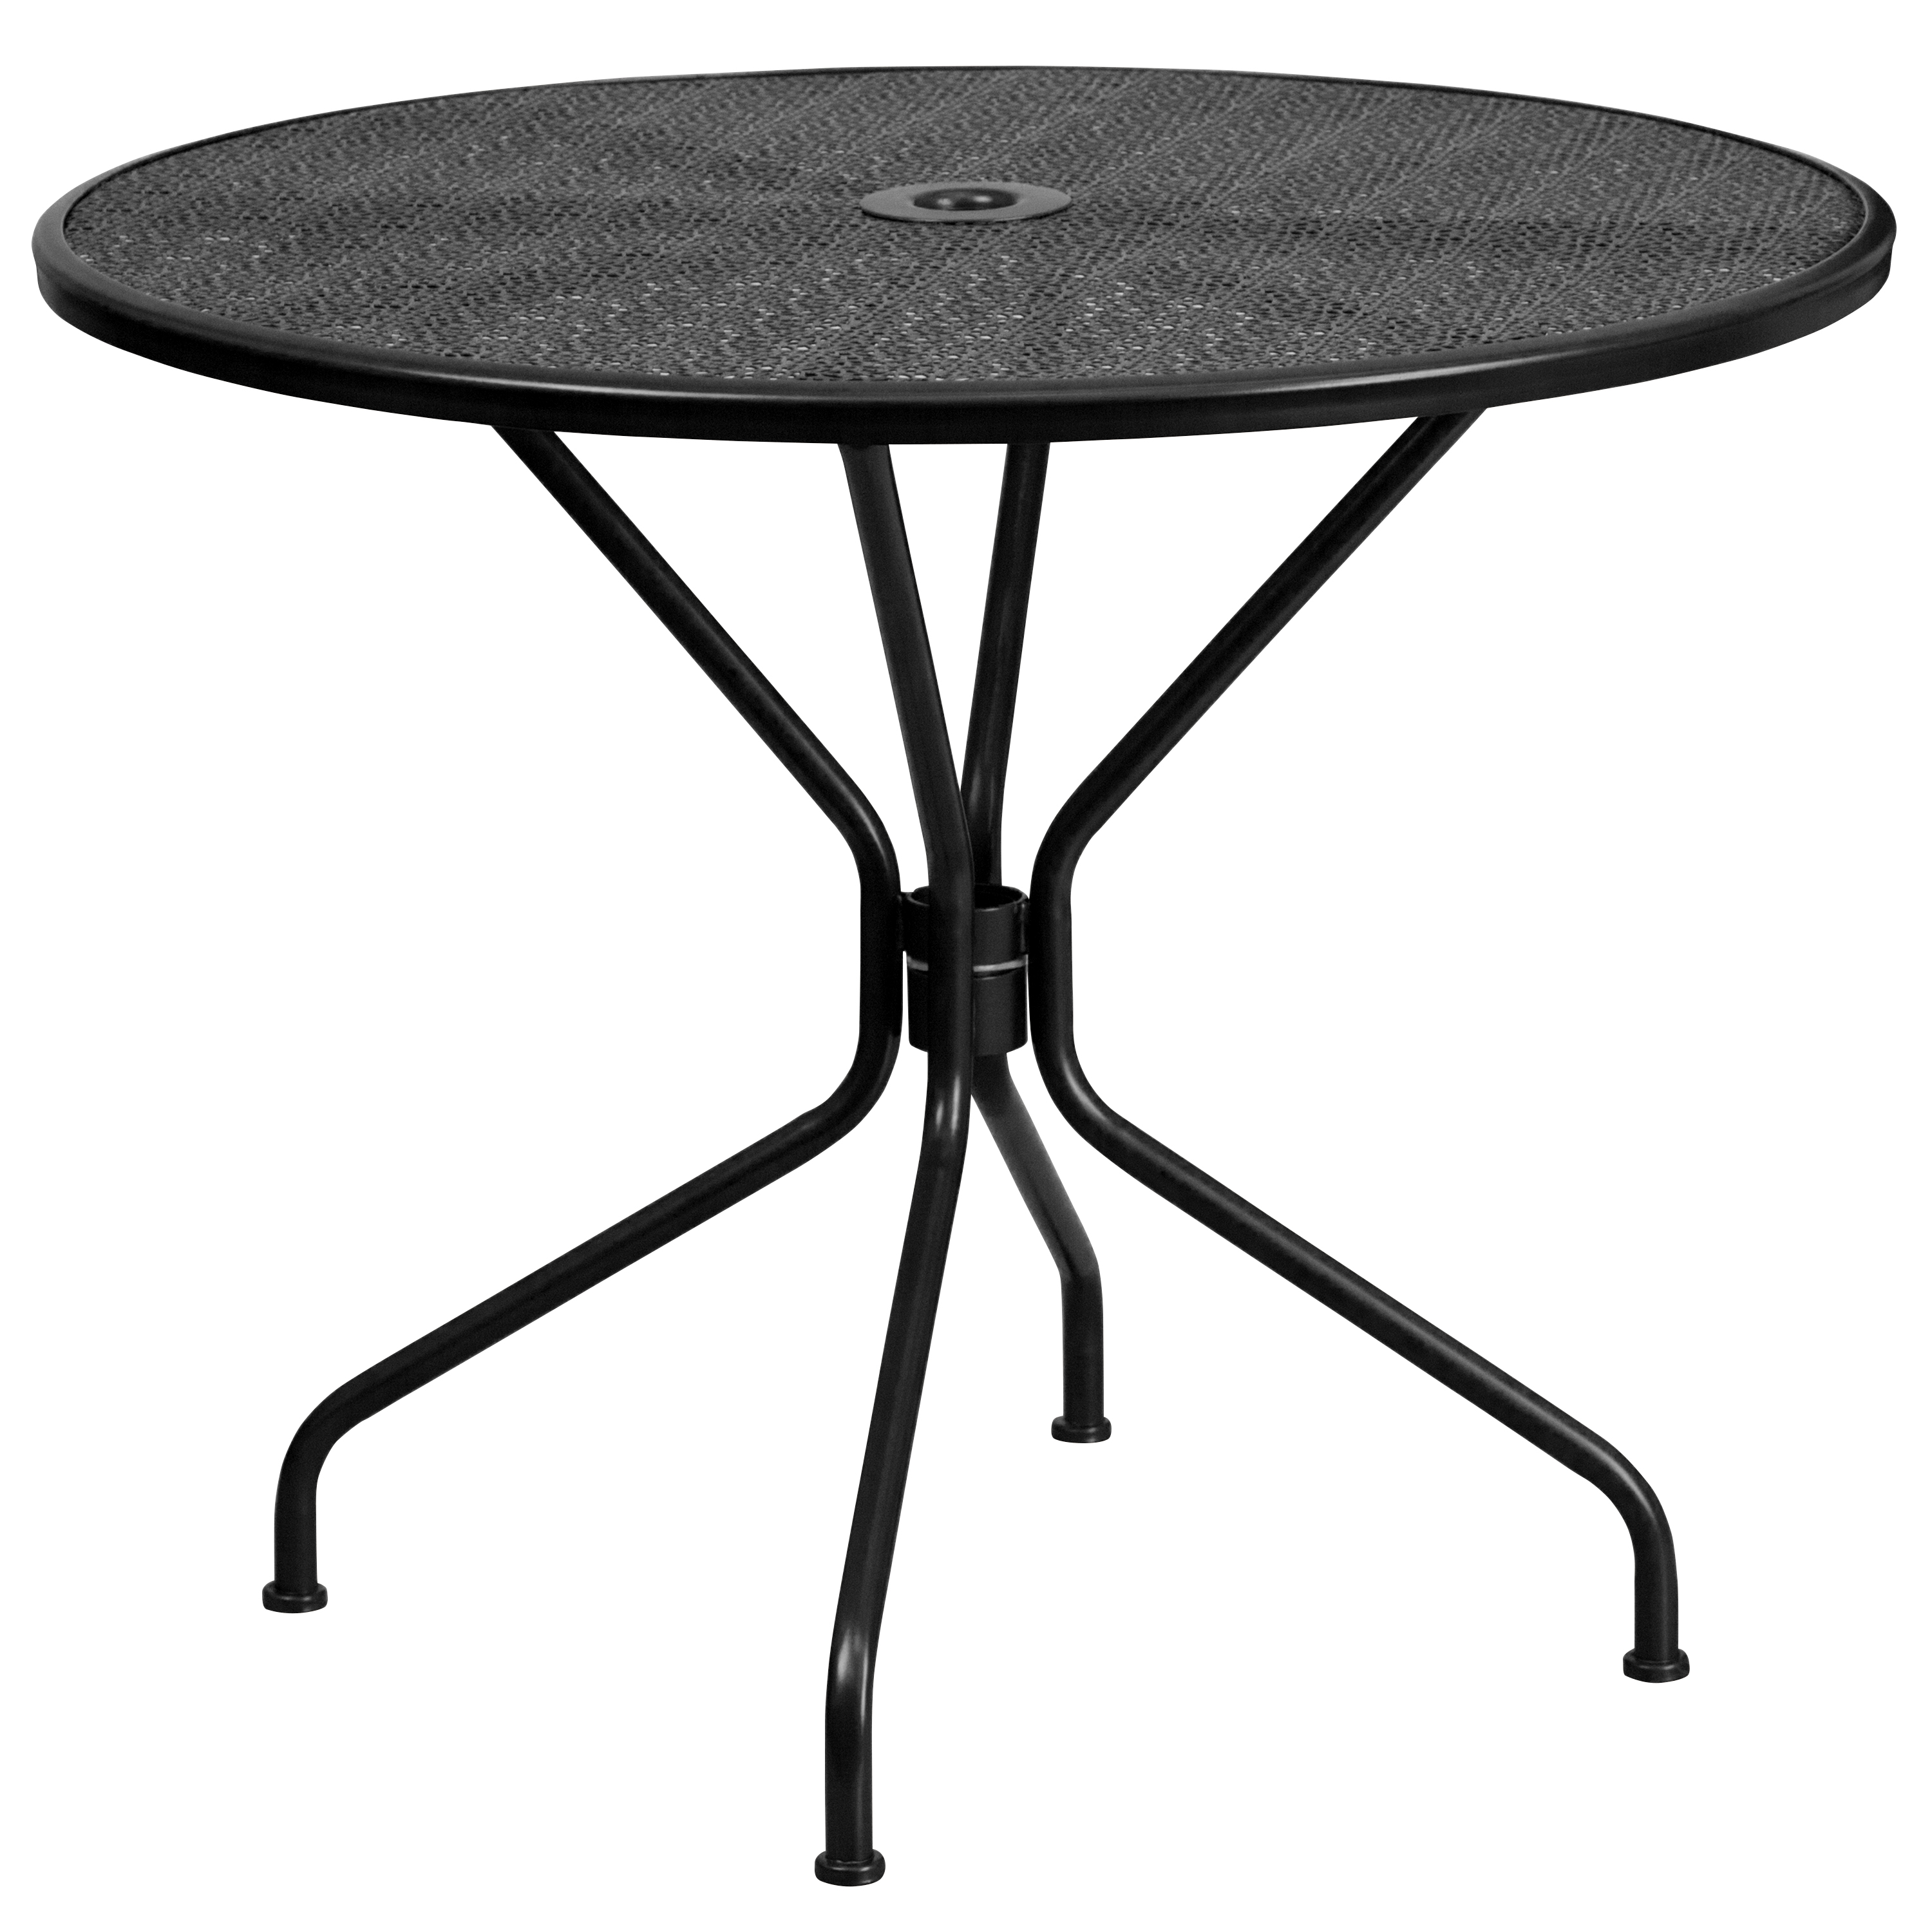 Flash Furniture Commercial Grade 35.25" Round Black Indoor-Outdoor Steel Patio Table Set with 4 Square Back Chairs - image 4 of 5